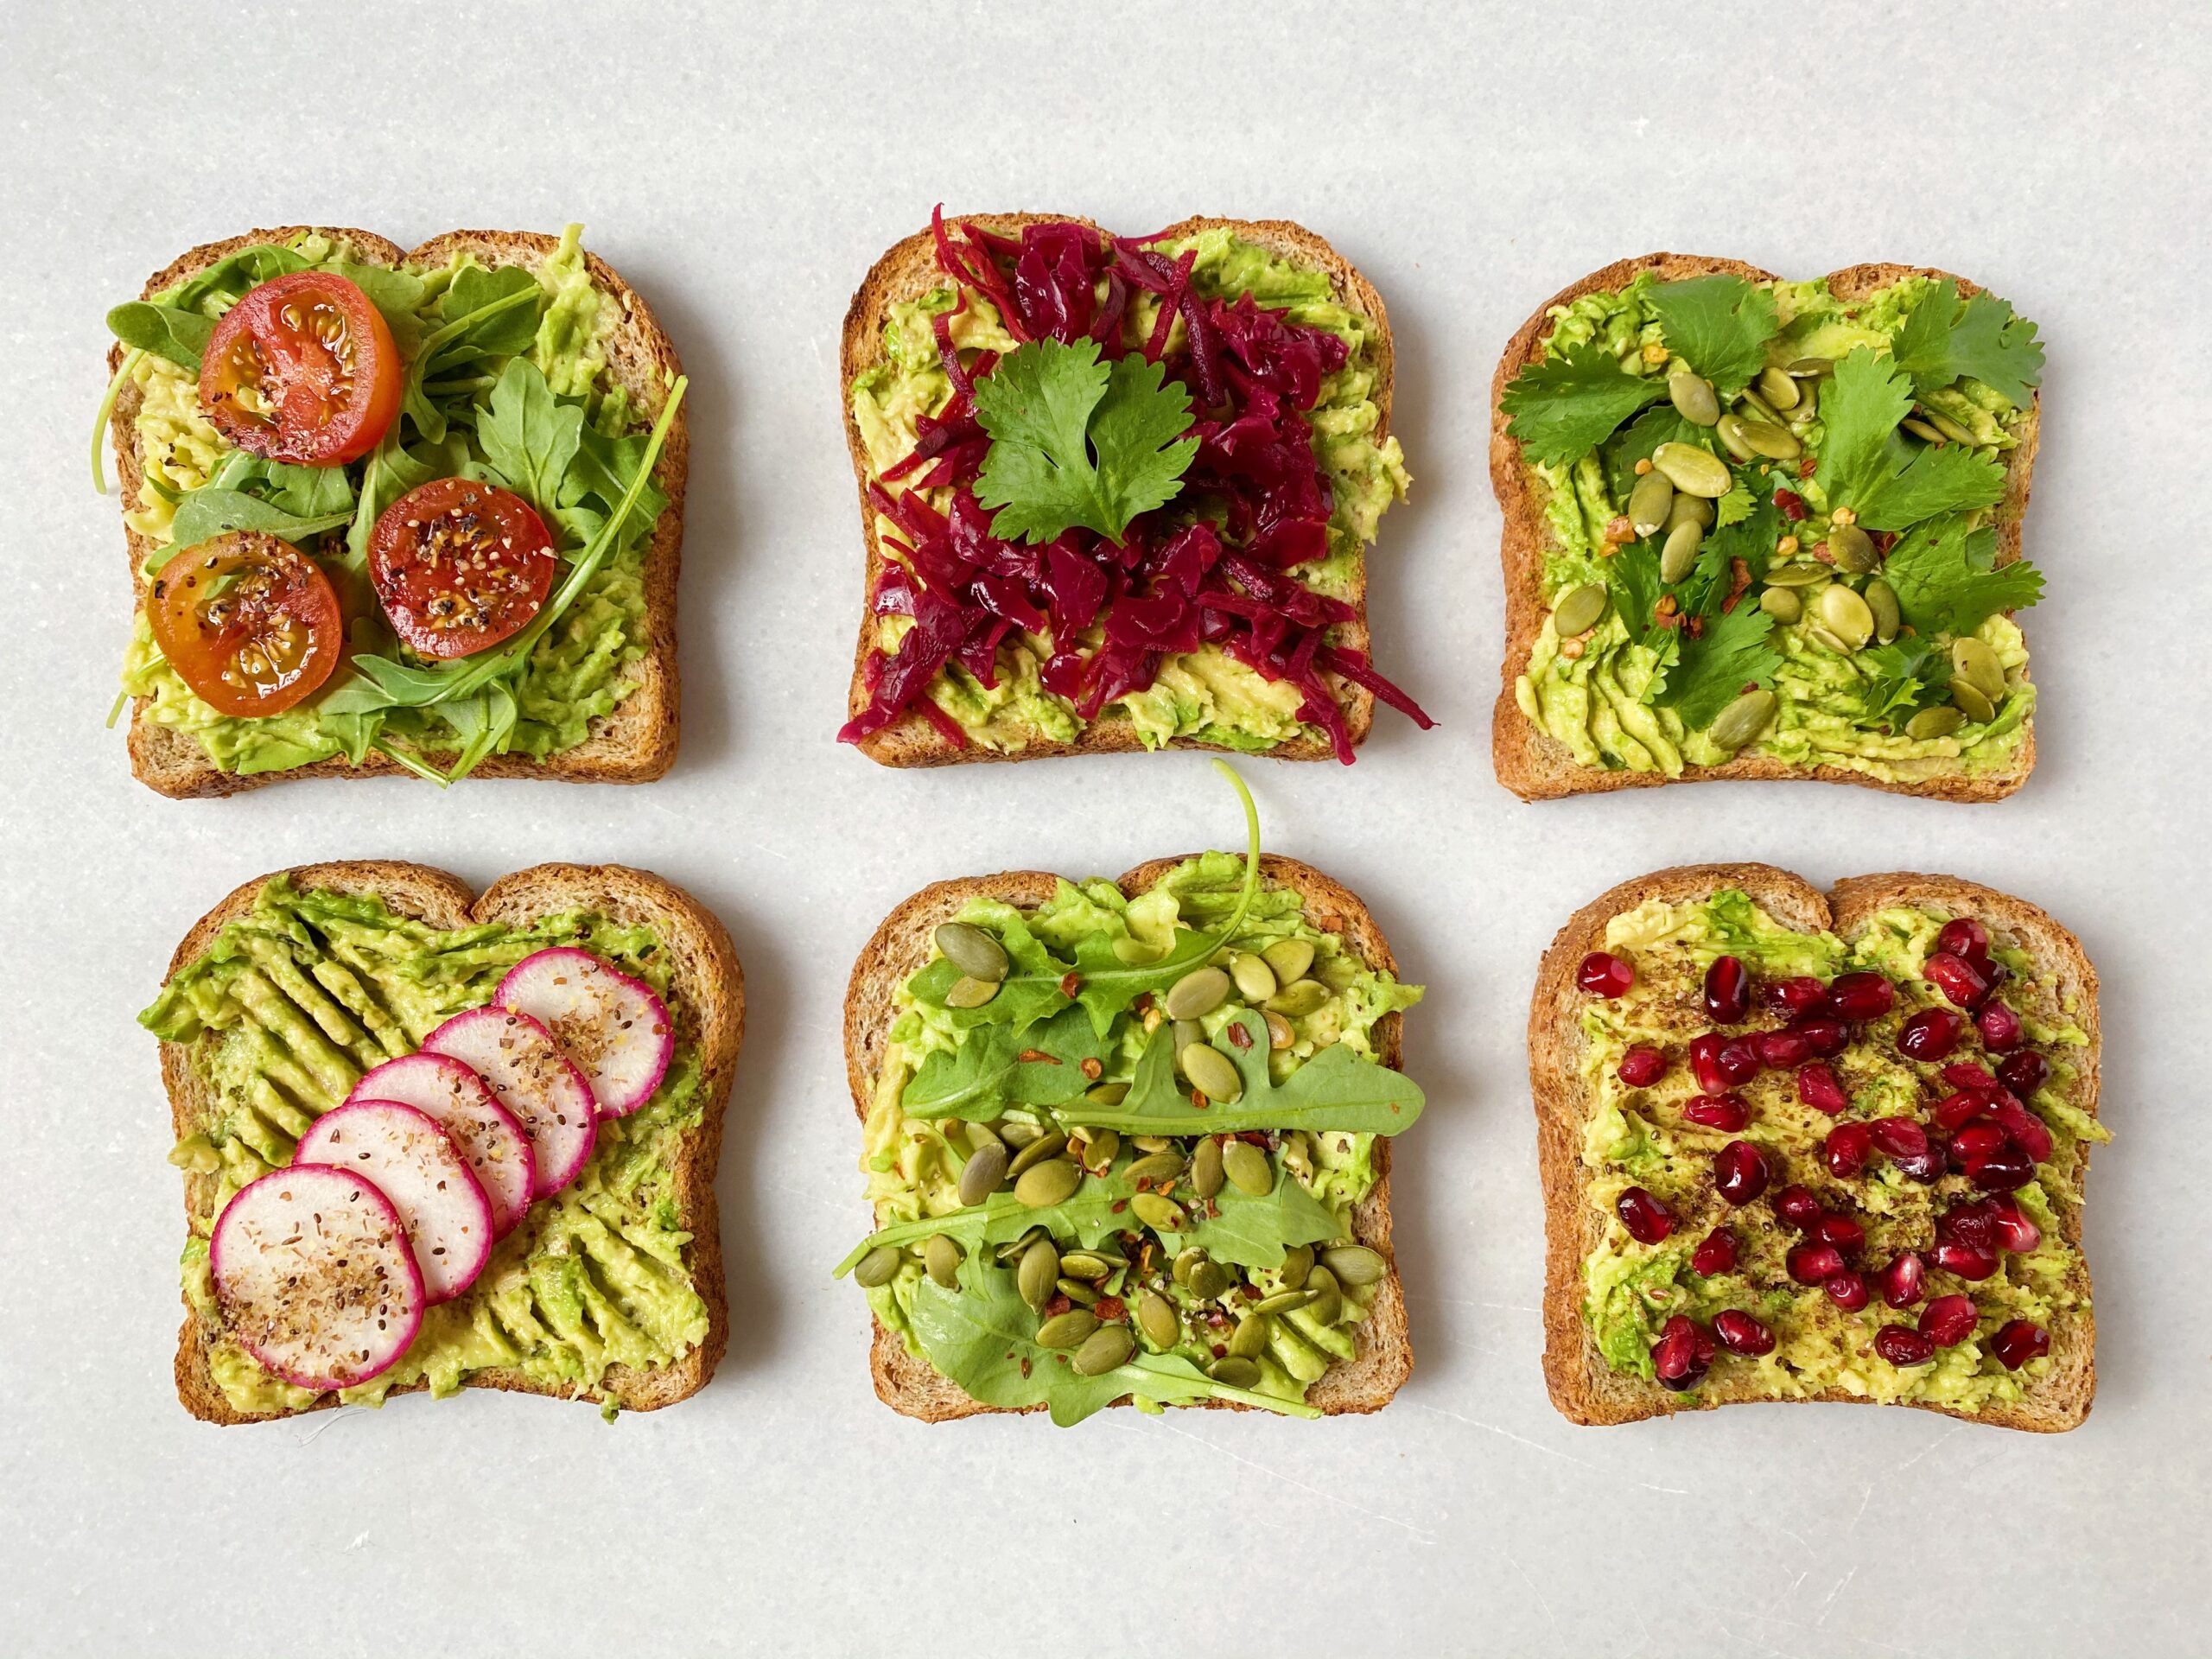 Sprouted Avocado Toast with Superfood Toppings